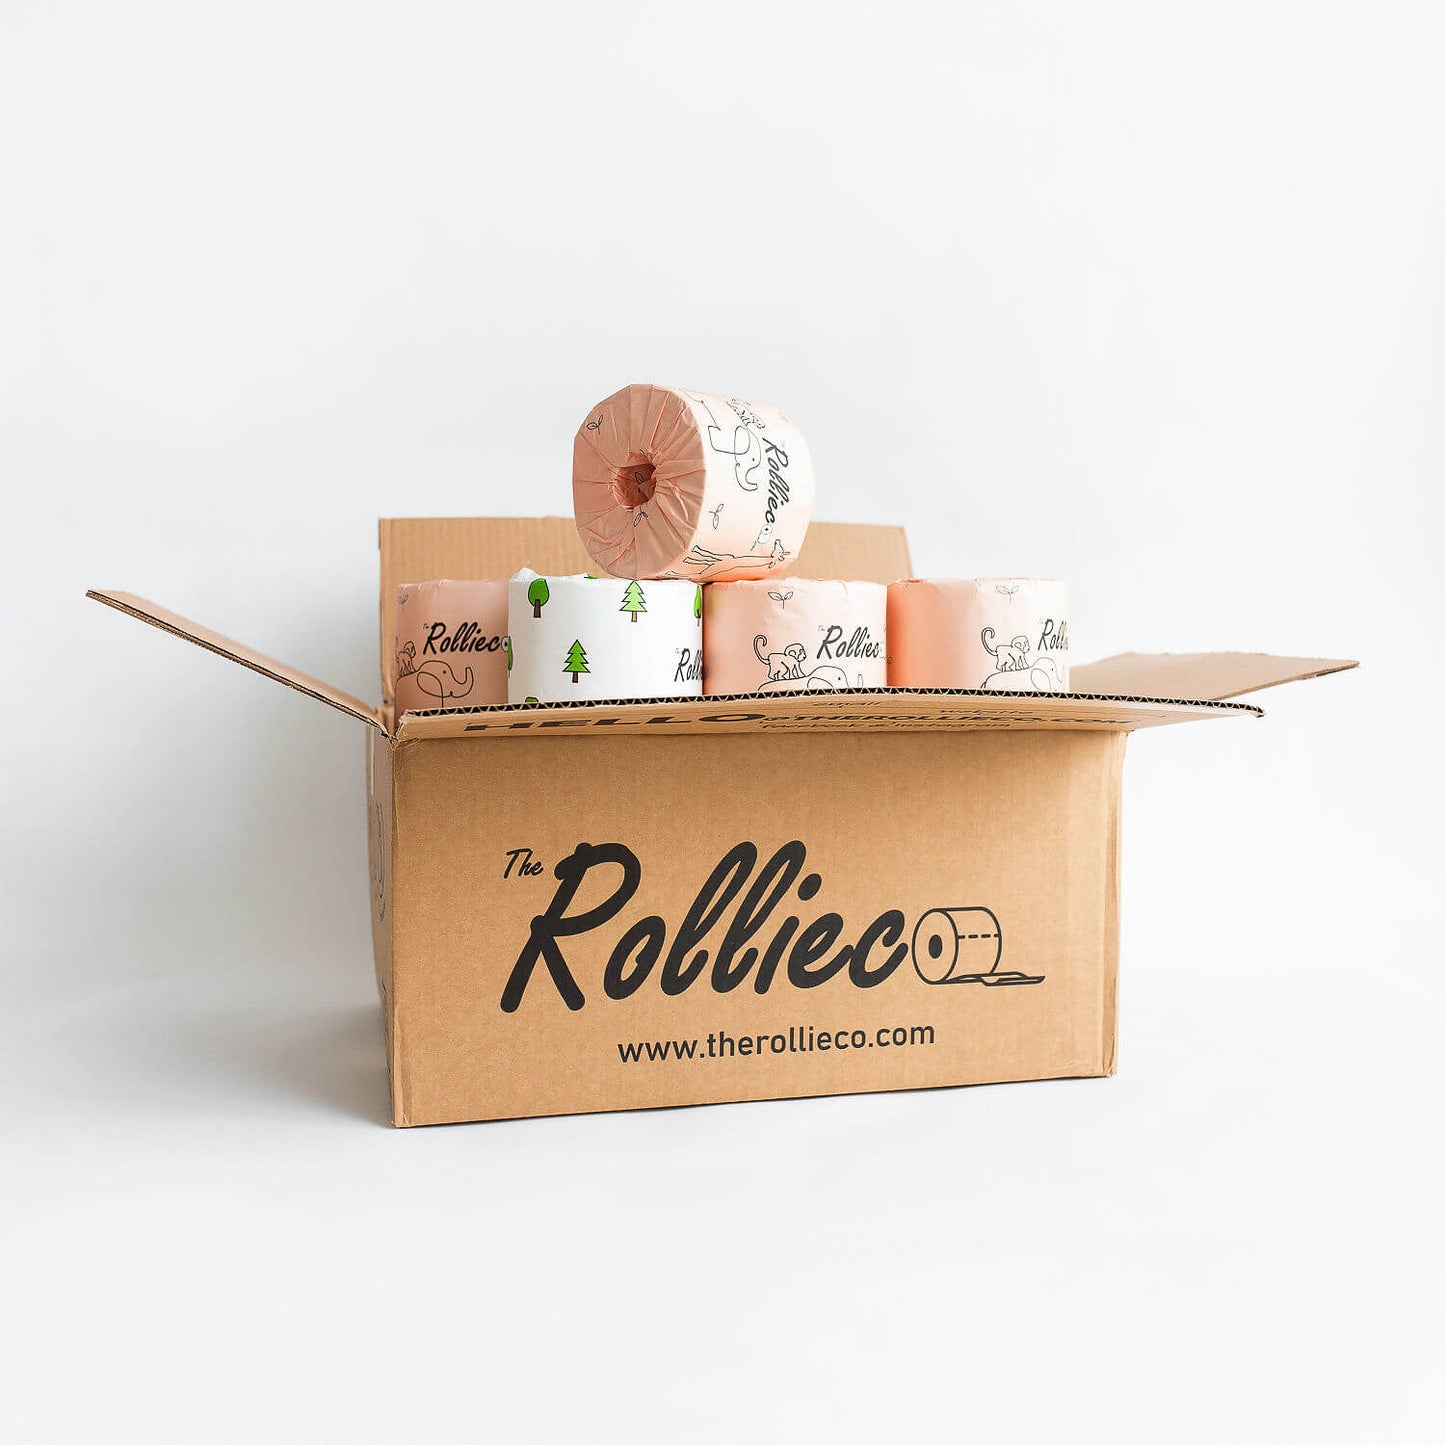 An opened carton box with rolls of individually paper wrapped eco toilet rolls showing. They are branded "the Rollieco"